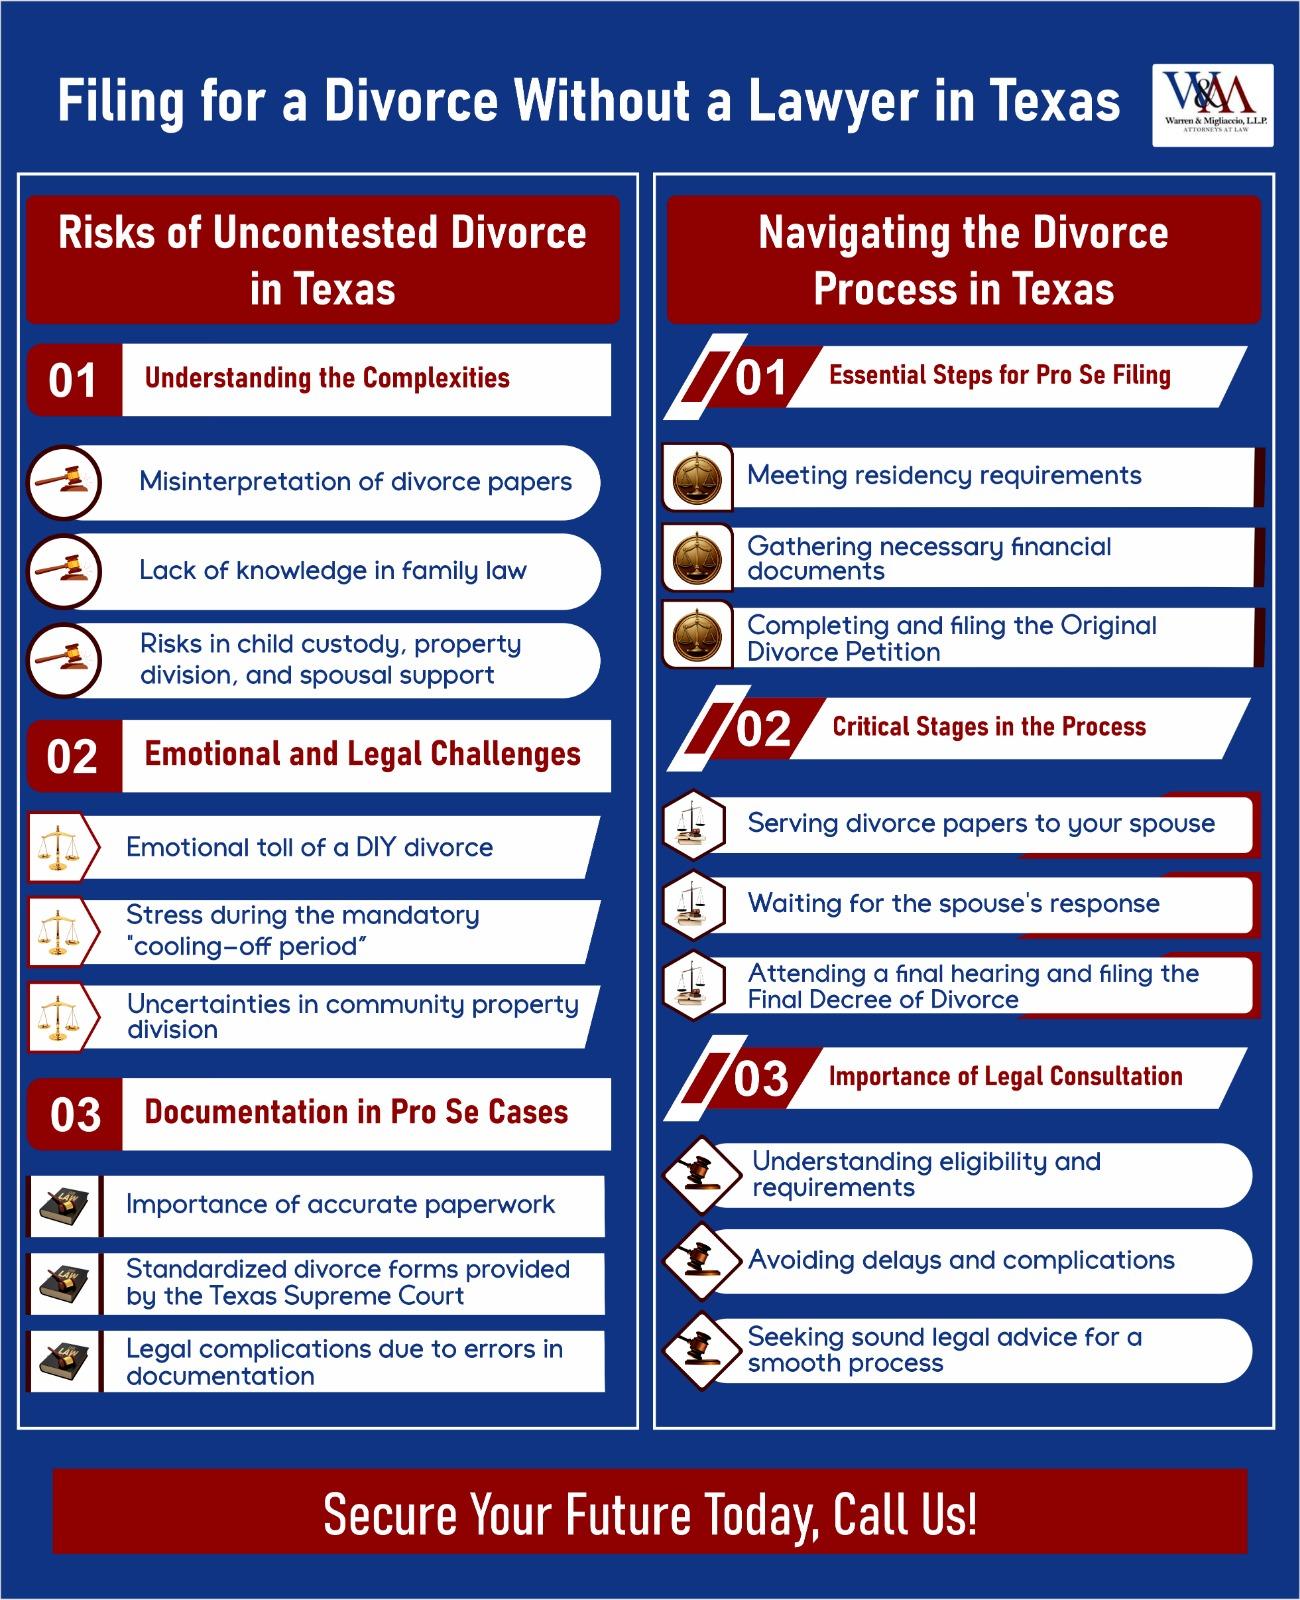 An informative infographic describing the risks of a divorce without a lawyer in Texas.